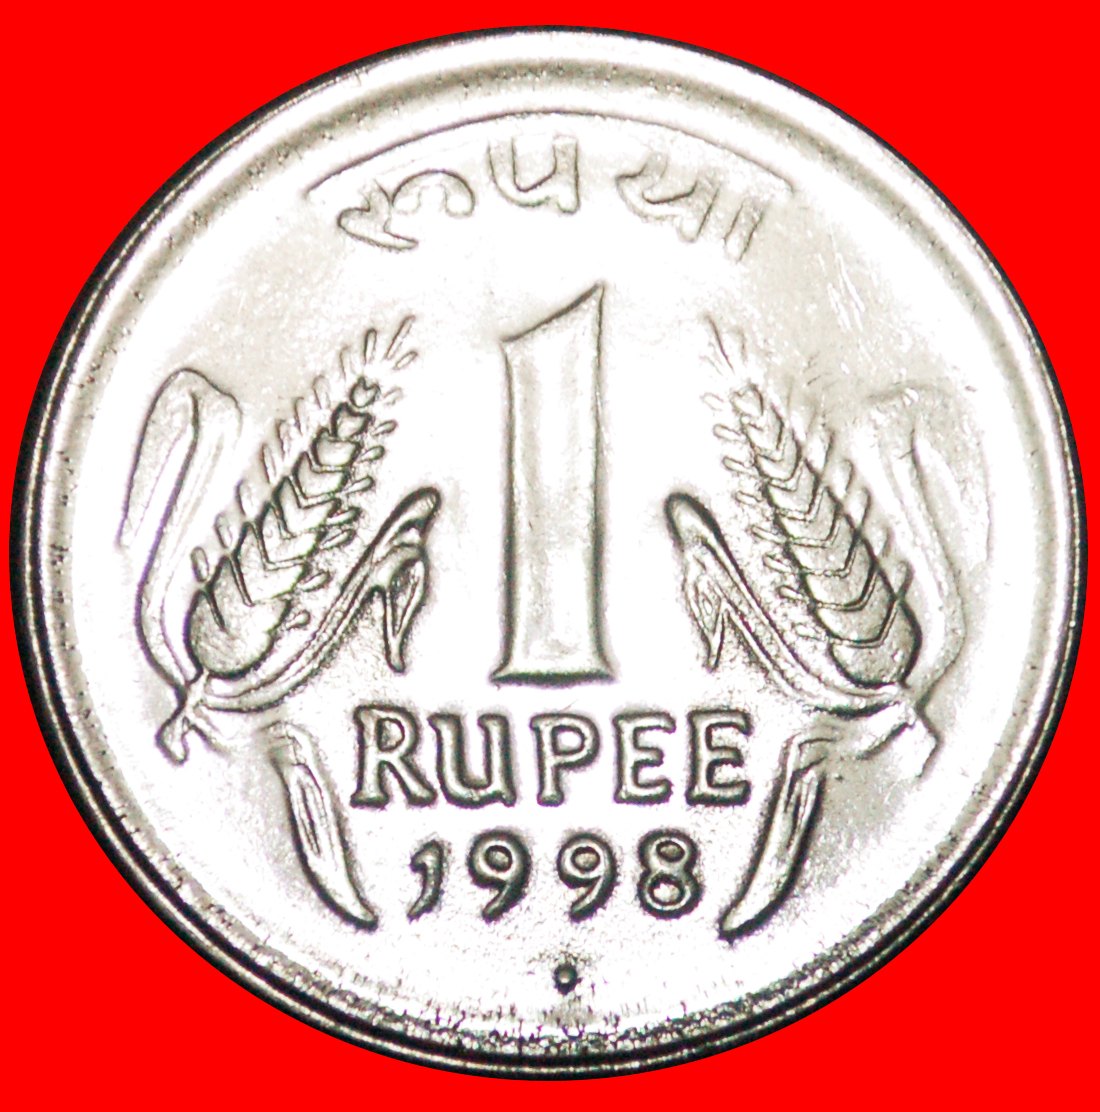  · LIONS: INDIA ★ 1 RUPEE 1998 MINT LUSTER! LOW START ★ NO RESERVE!   